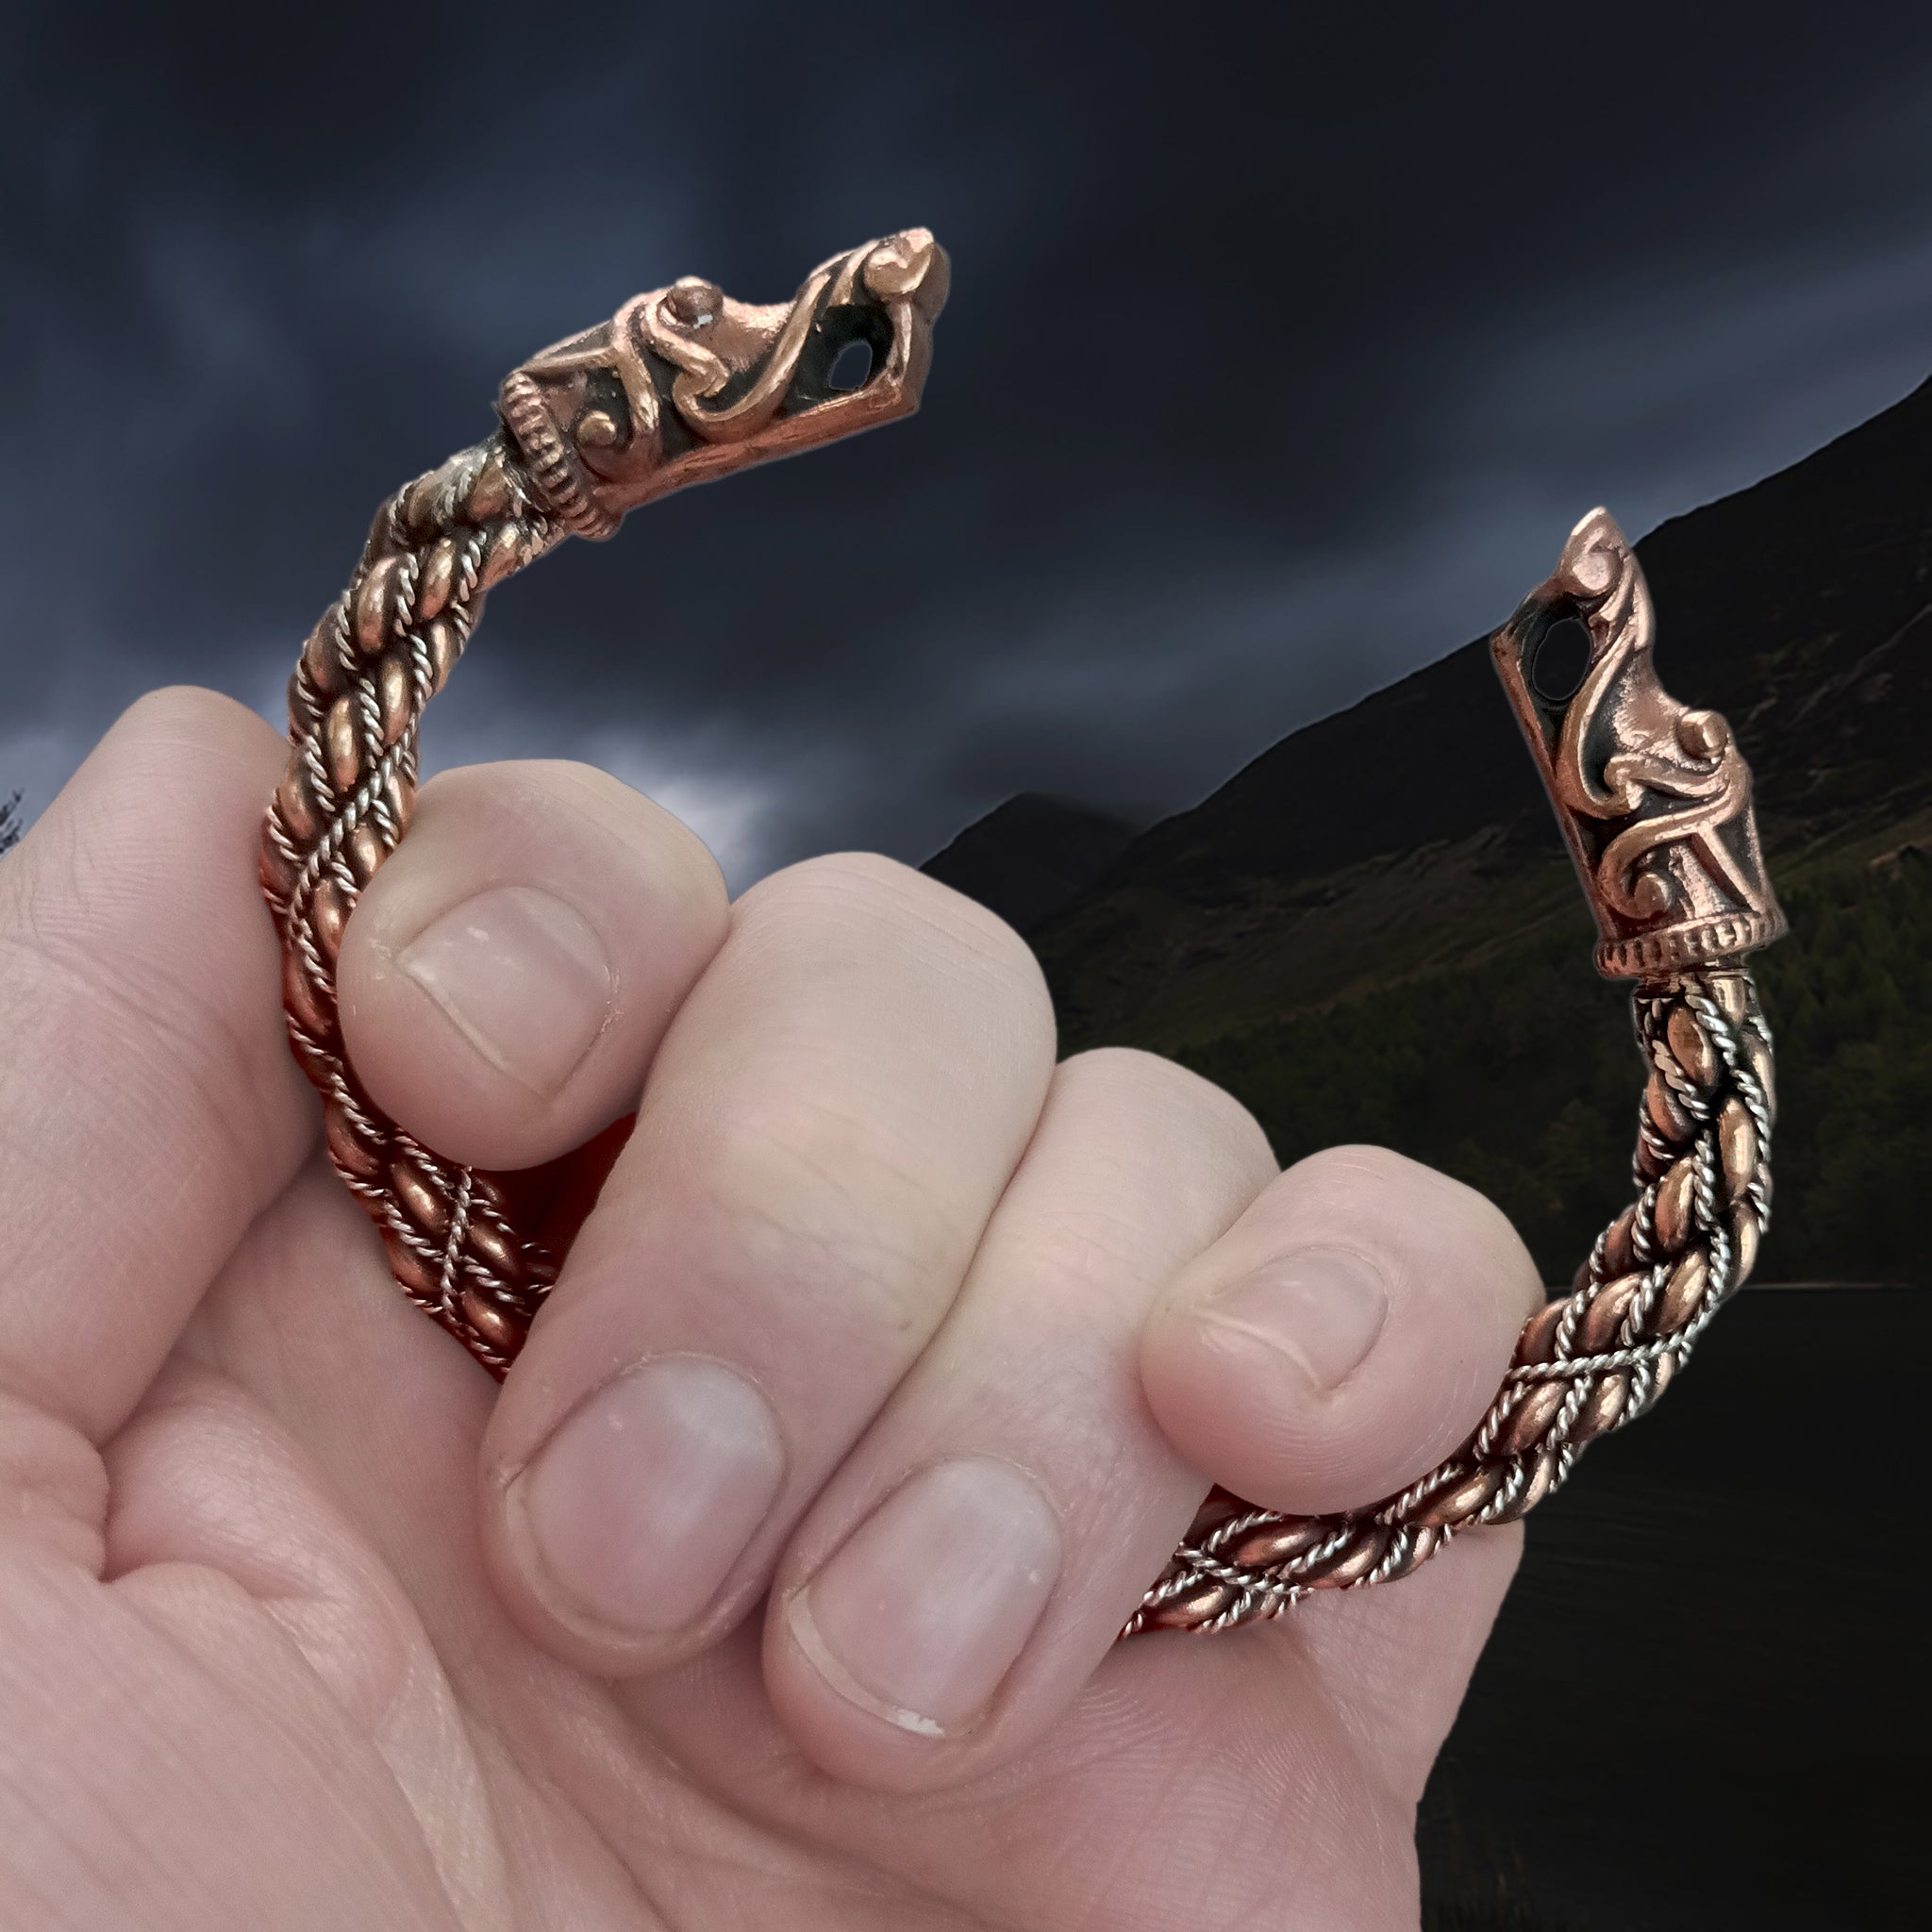 Handmade Twisted Bronze and Silver Arm Ring / Bracelet With Gotlandic Dragon Heads in Hand